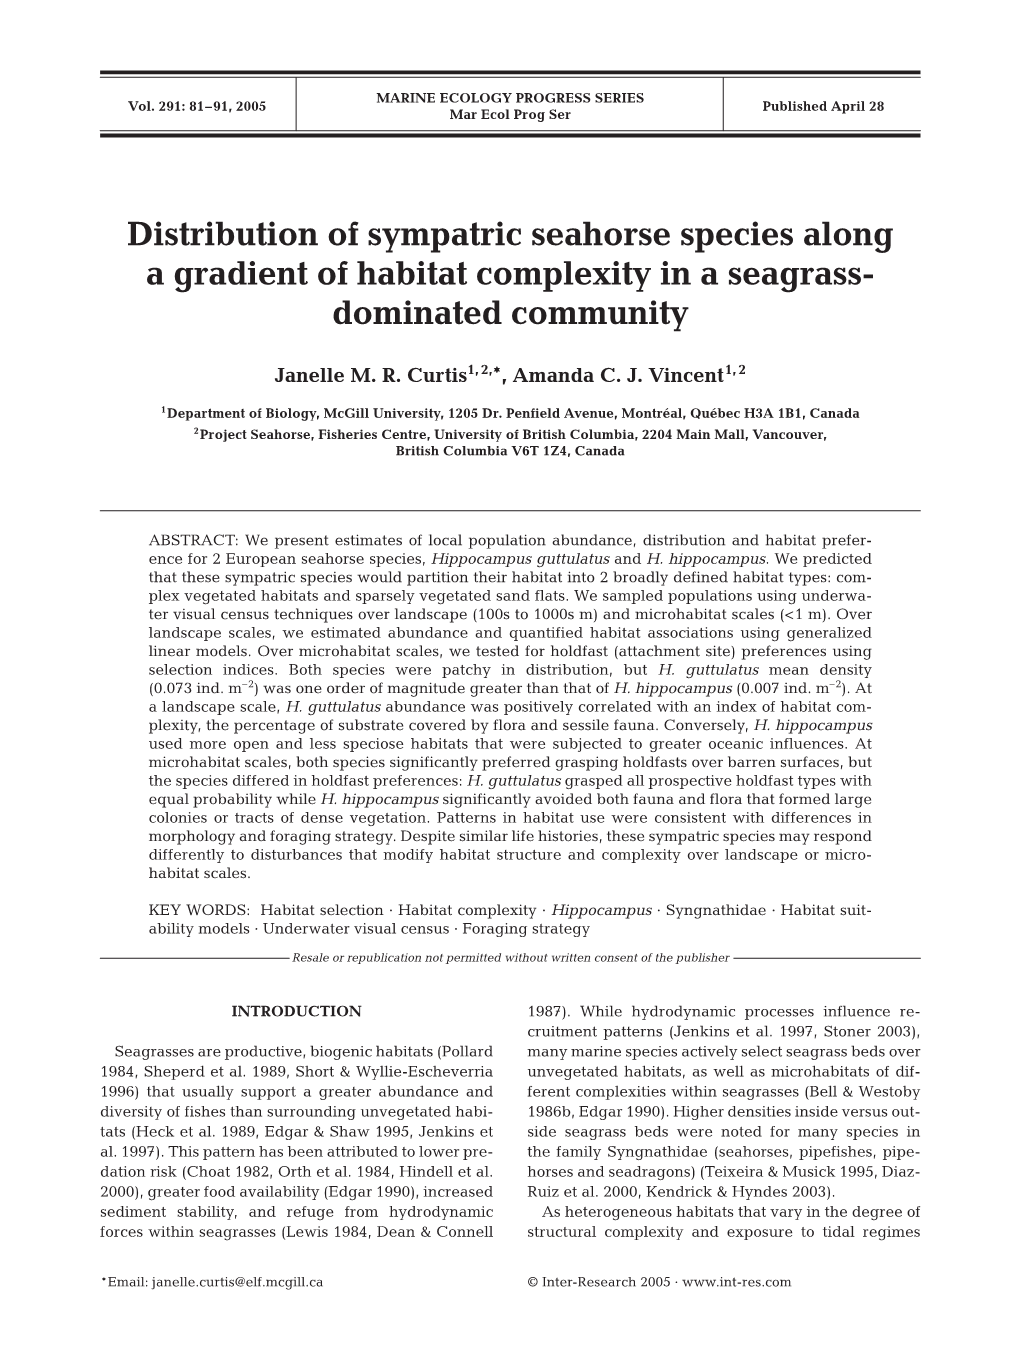 Distribution of Sympatric Seahorse Species Along a Gradient of Habitat Complexity in a Seagrass- Dominated Community